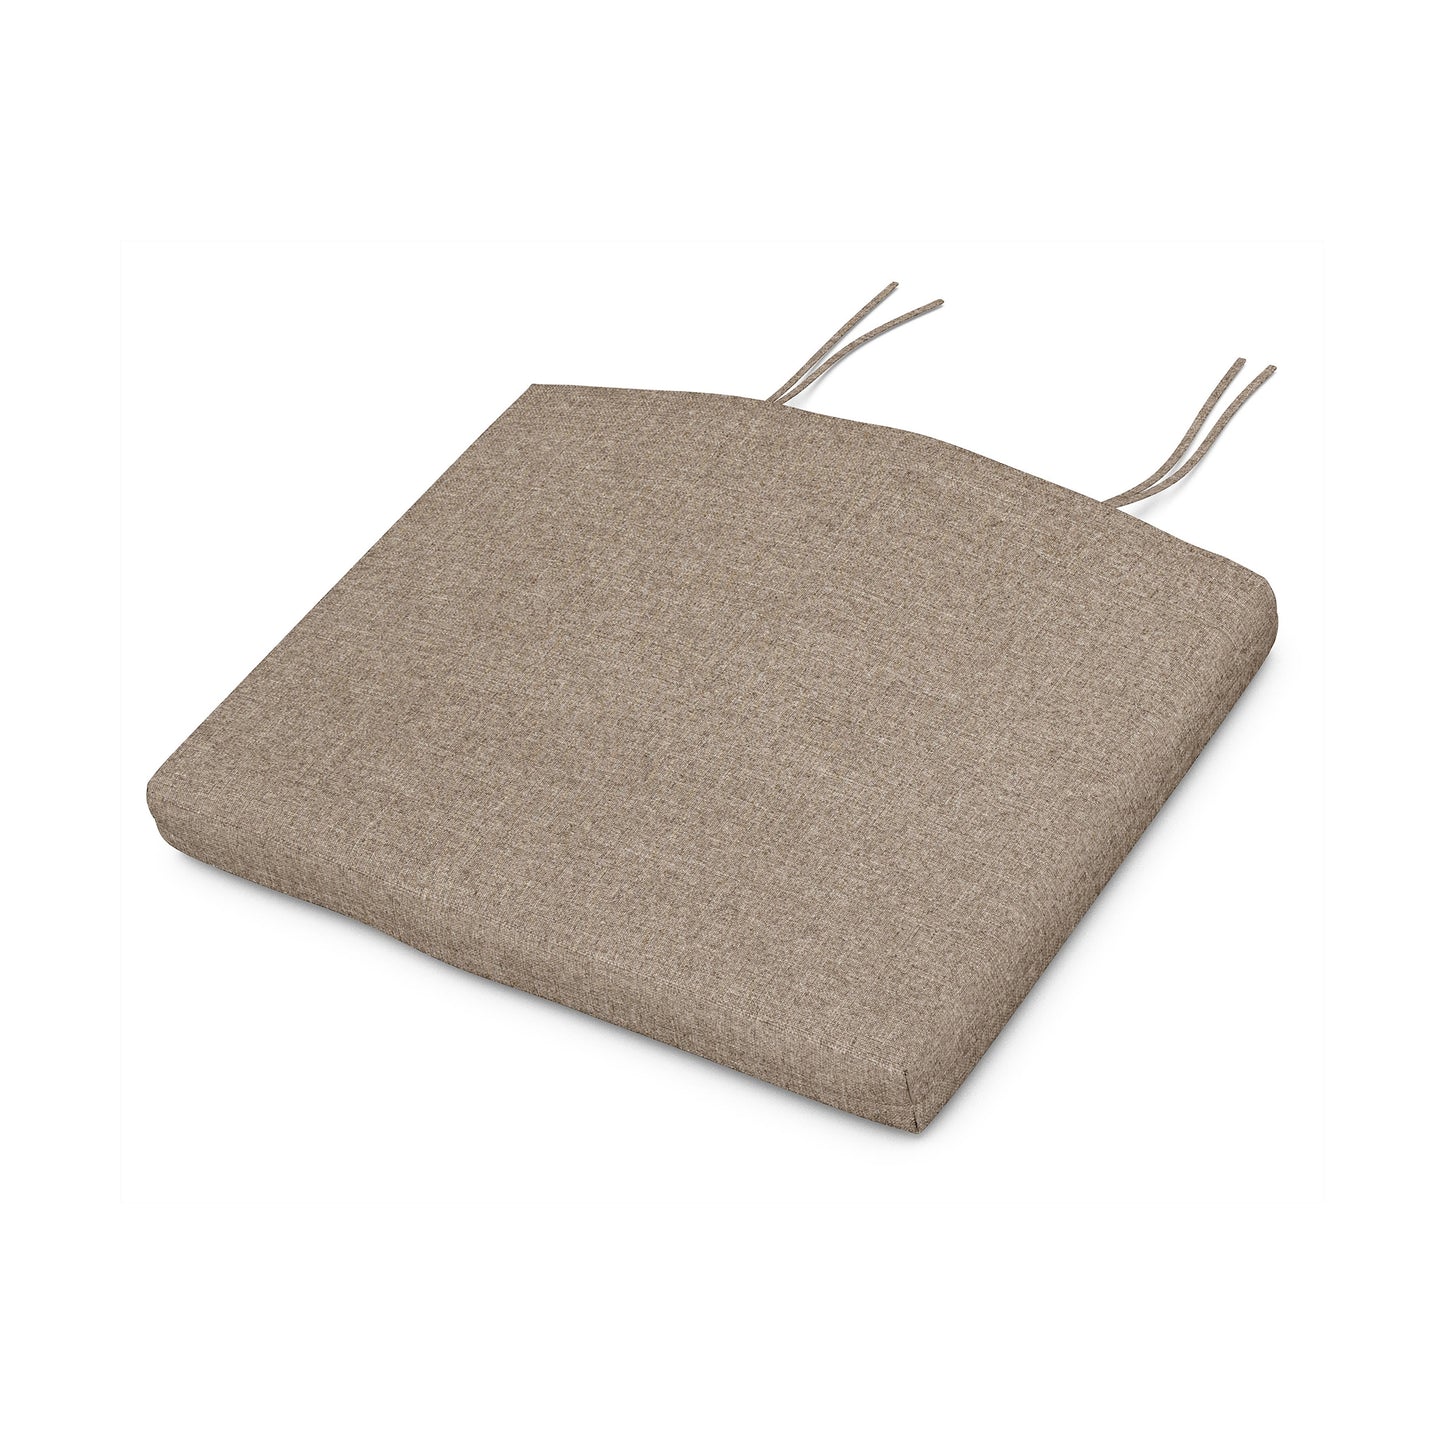 A square, beige POLYWOOD® XPWS0003 - Seat Cushion with two tie straps on a white background.